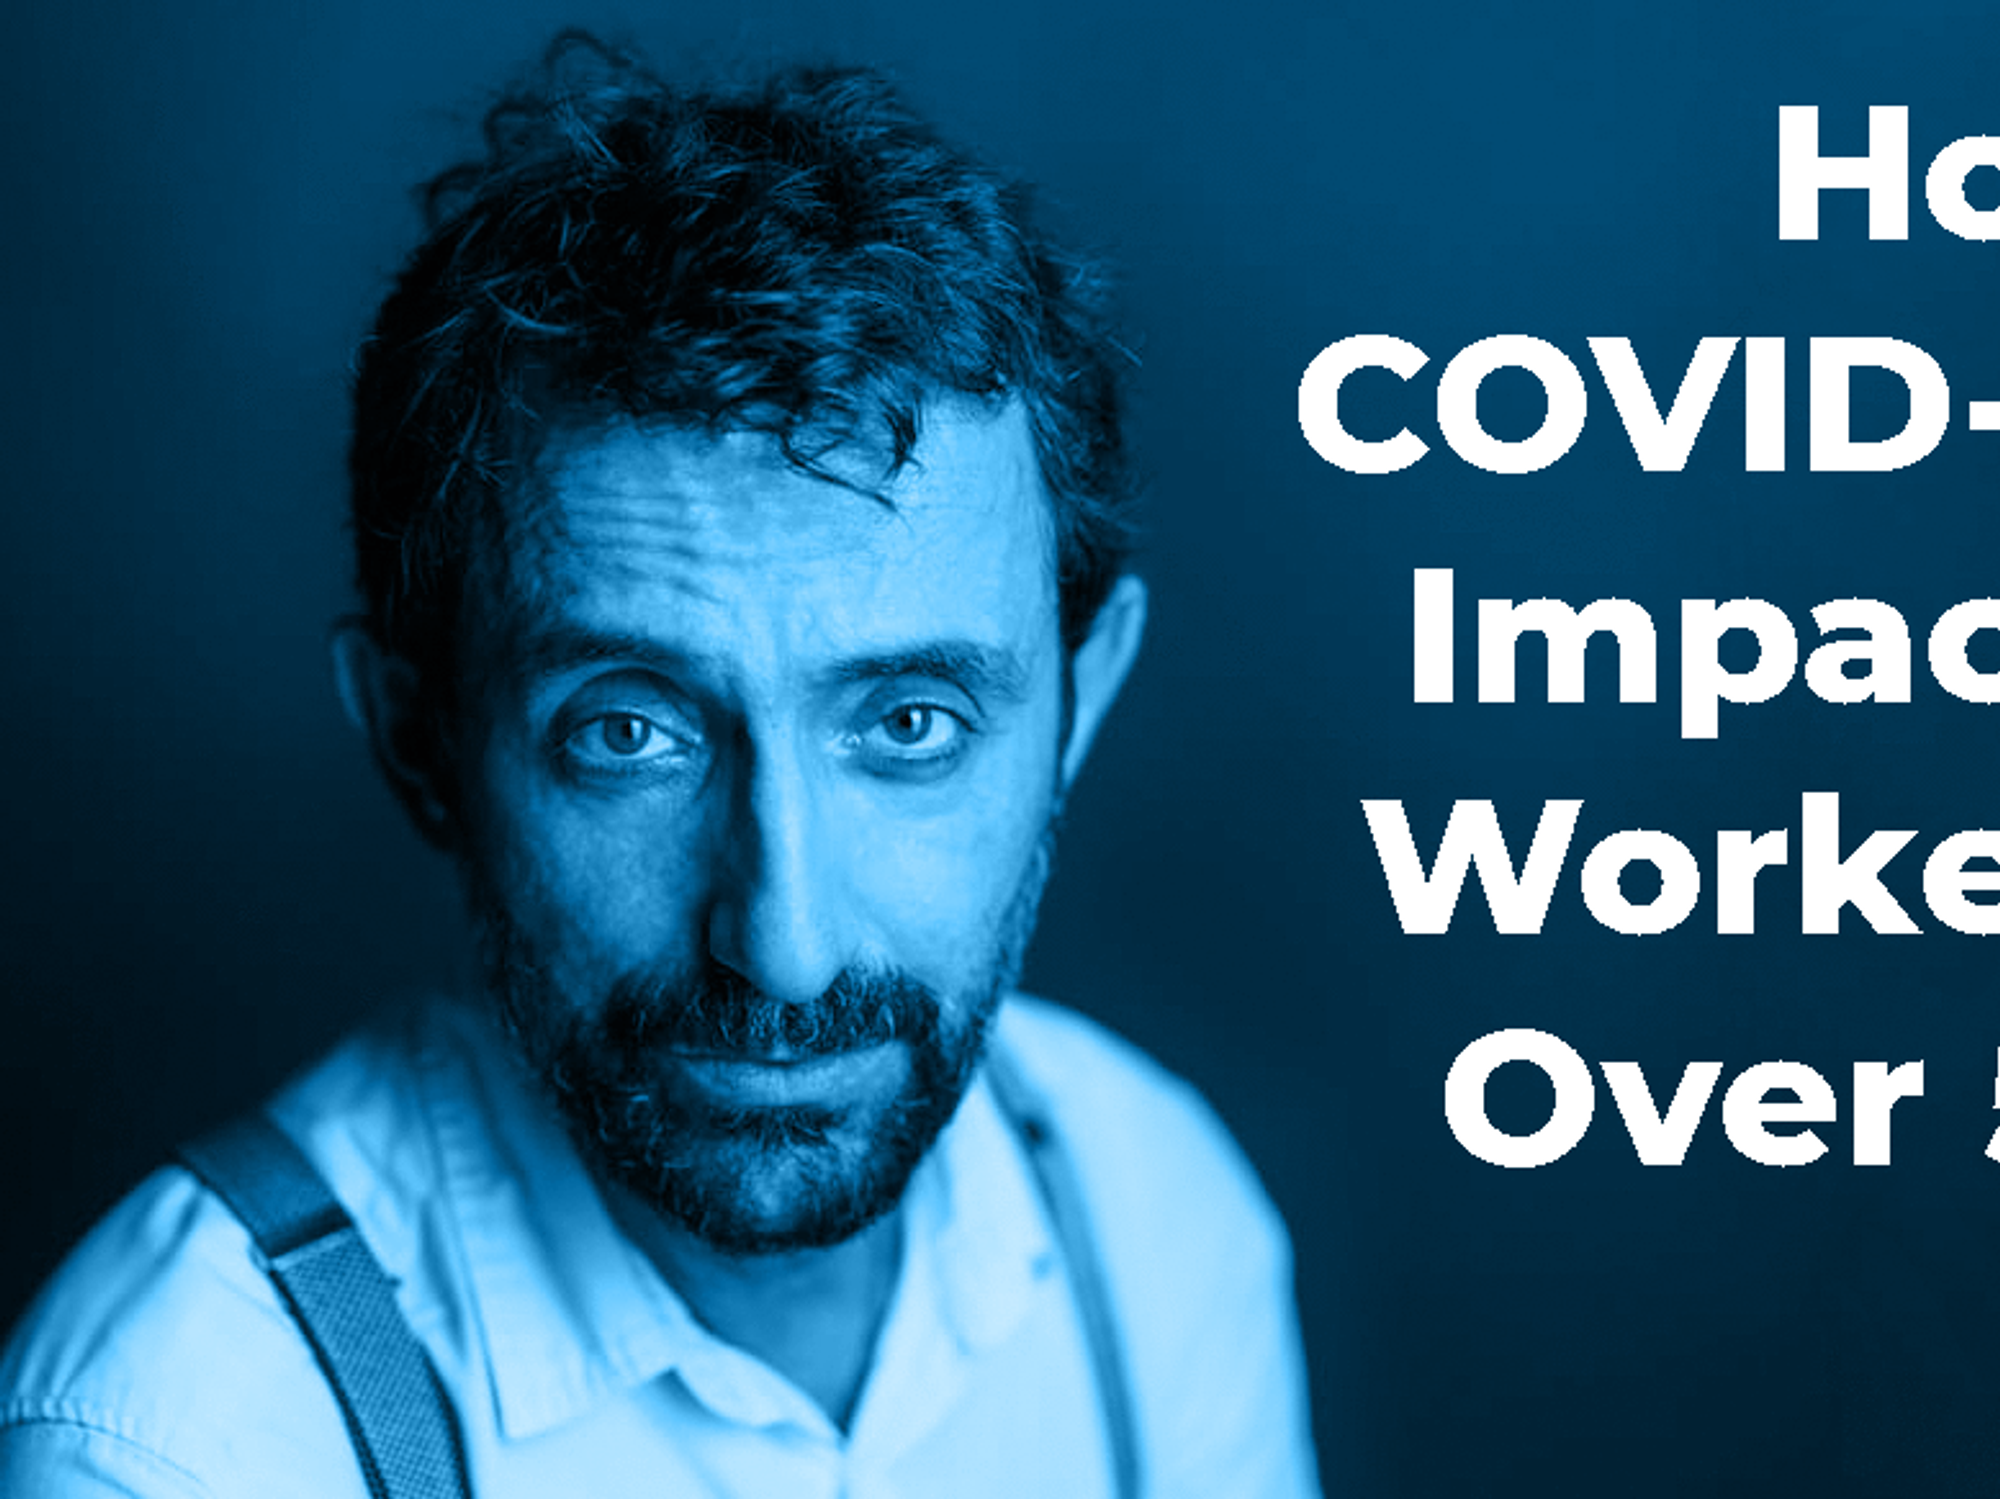 How COVID-19 Impacts Workers Over 50